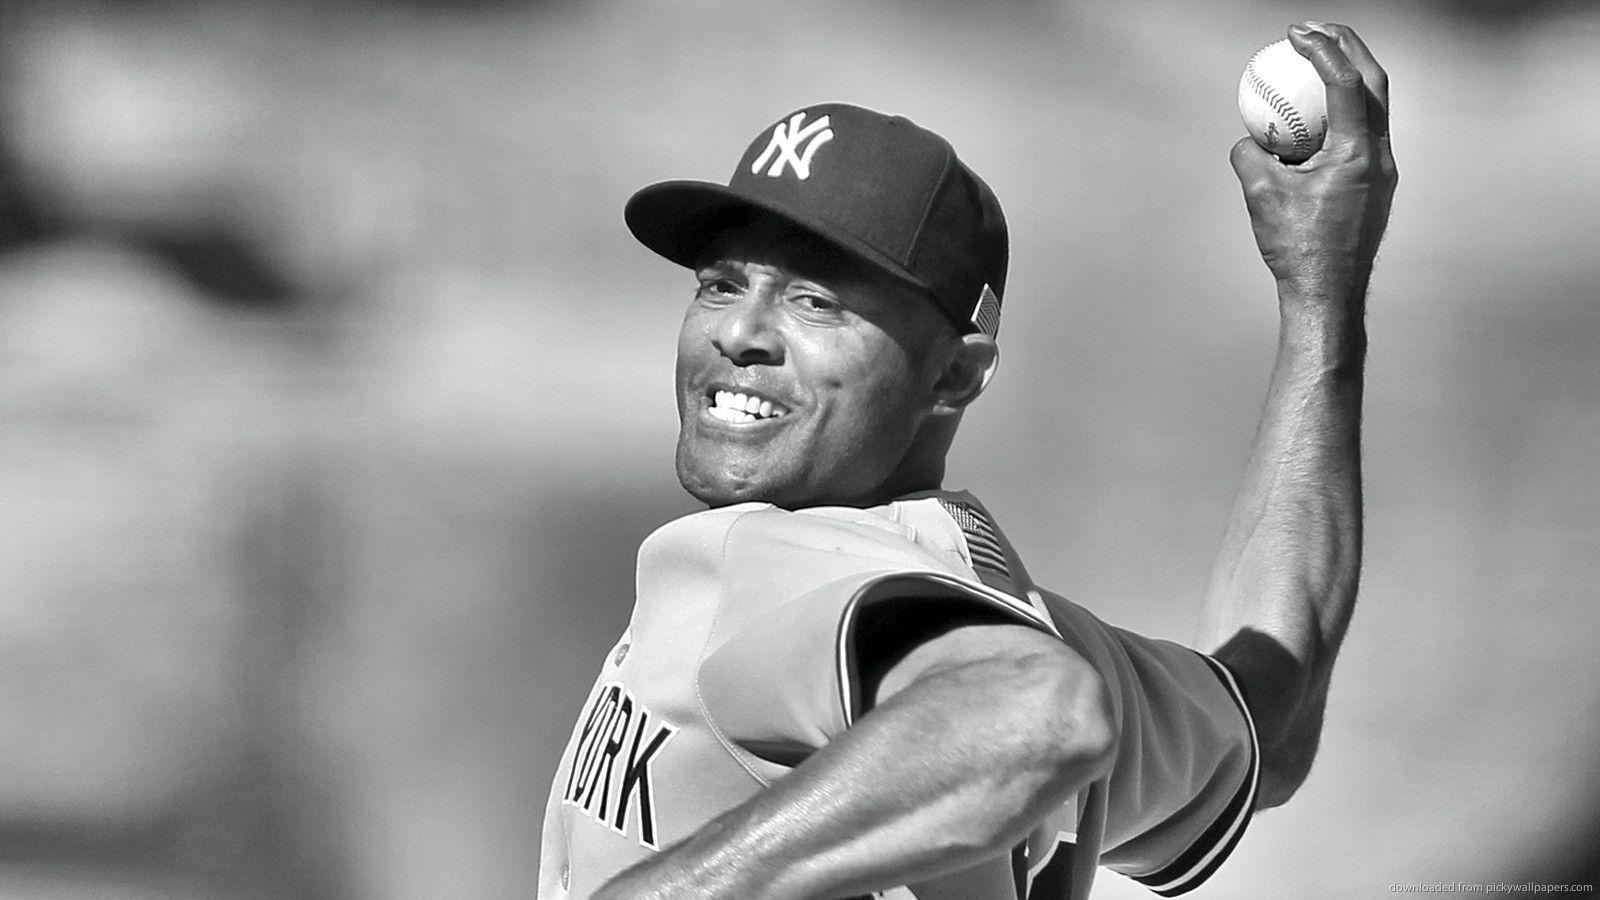 Download 1600x900 Mariano Rivera Pitch In Black And White Wallpaper